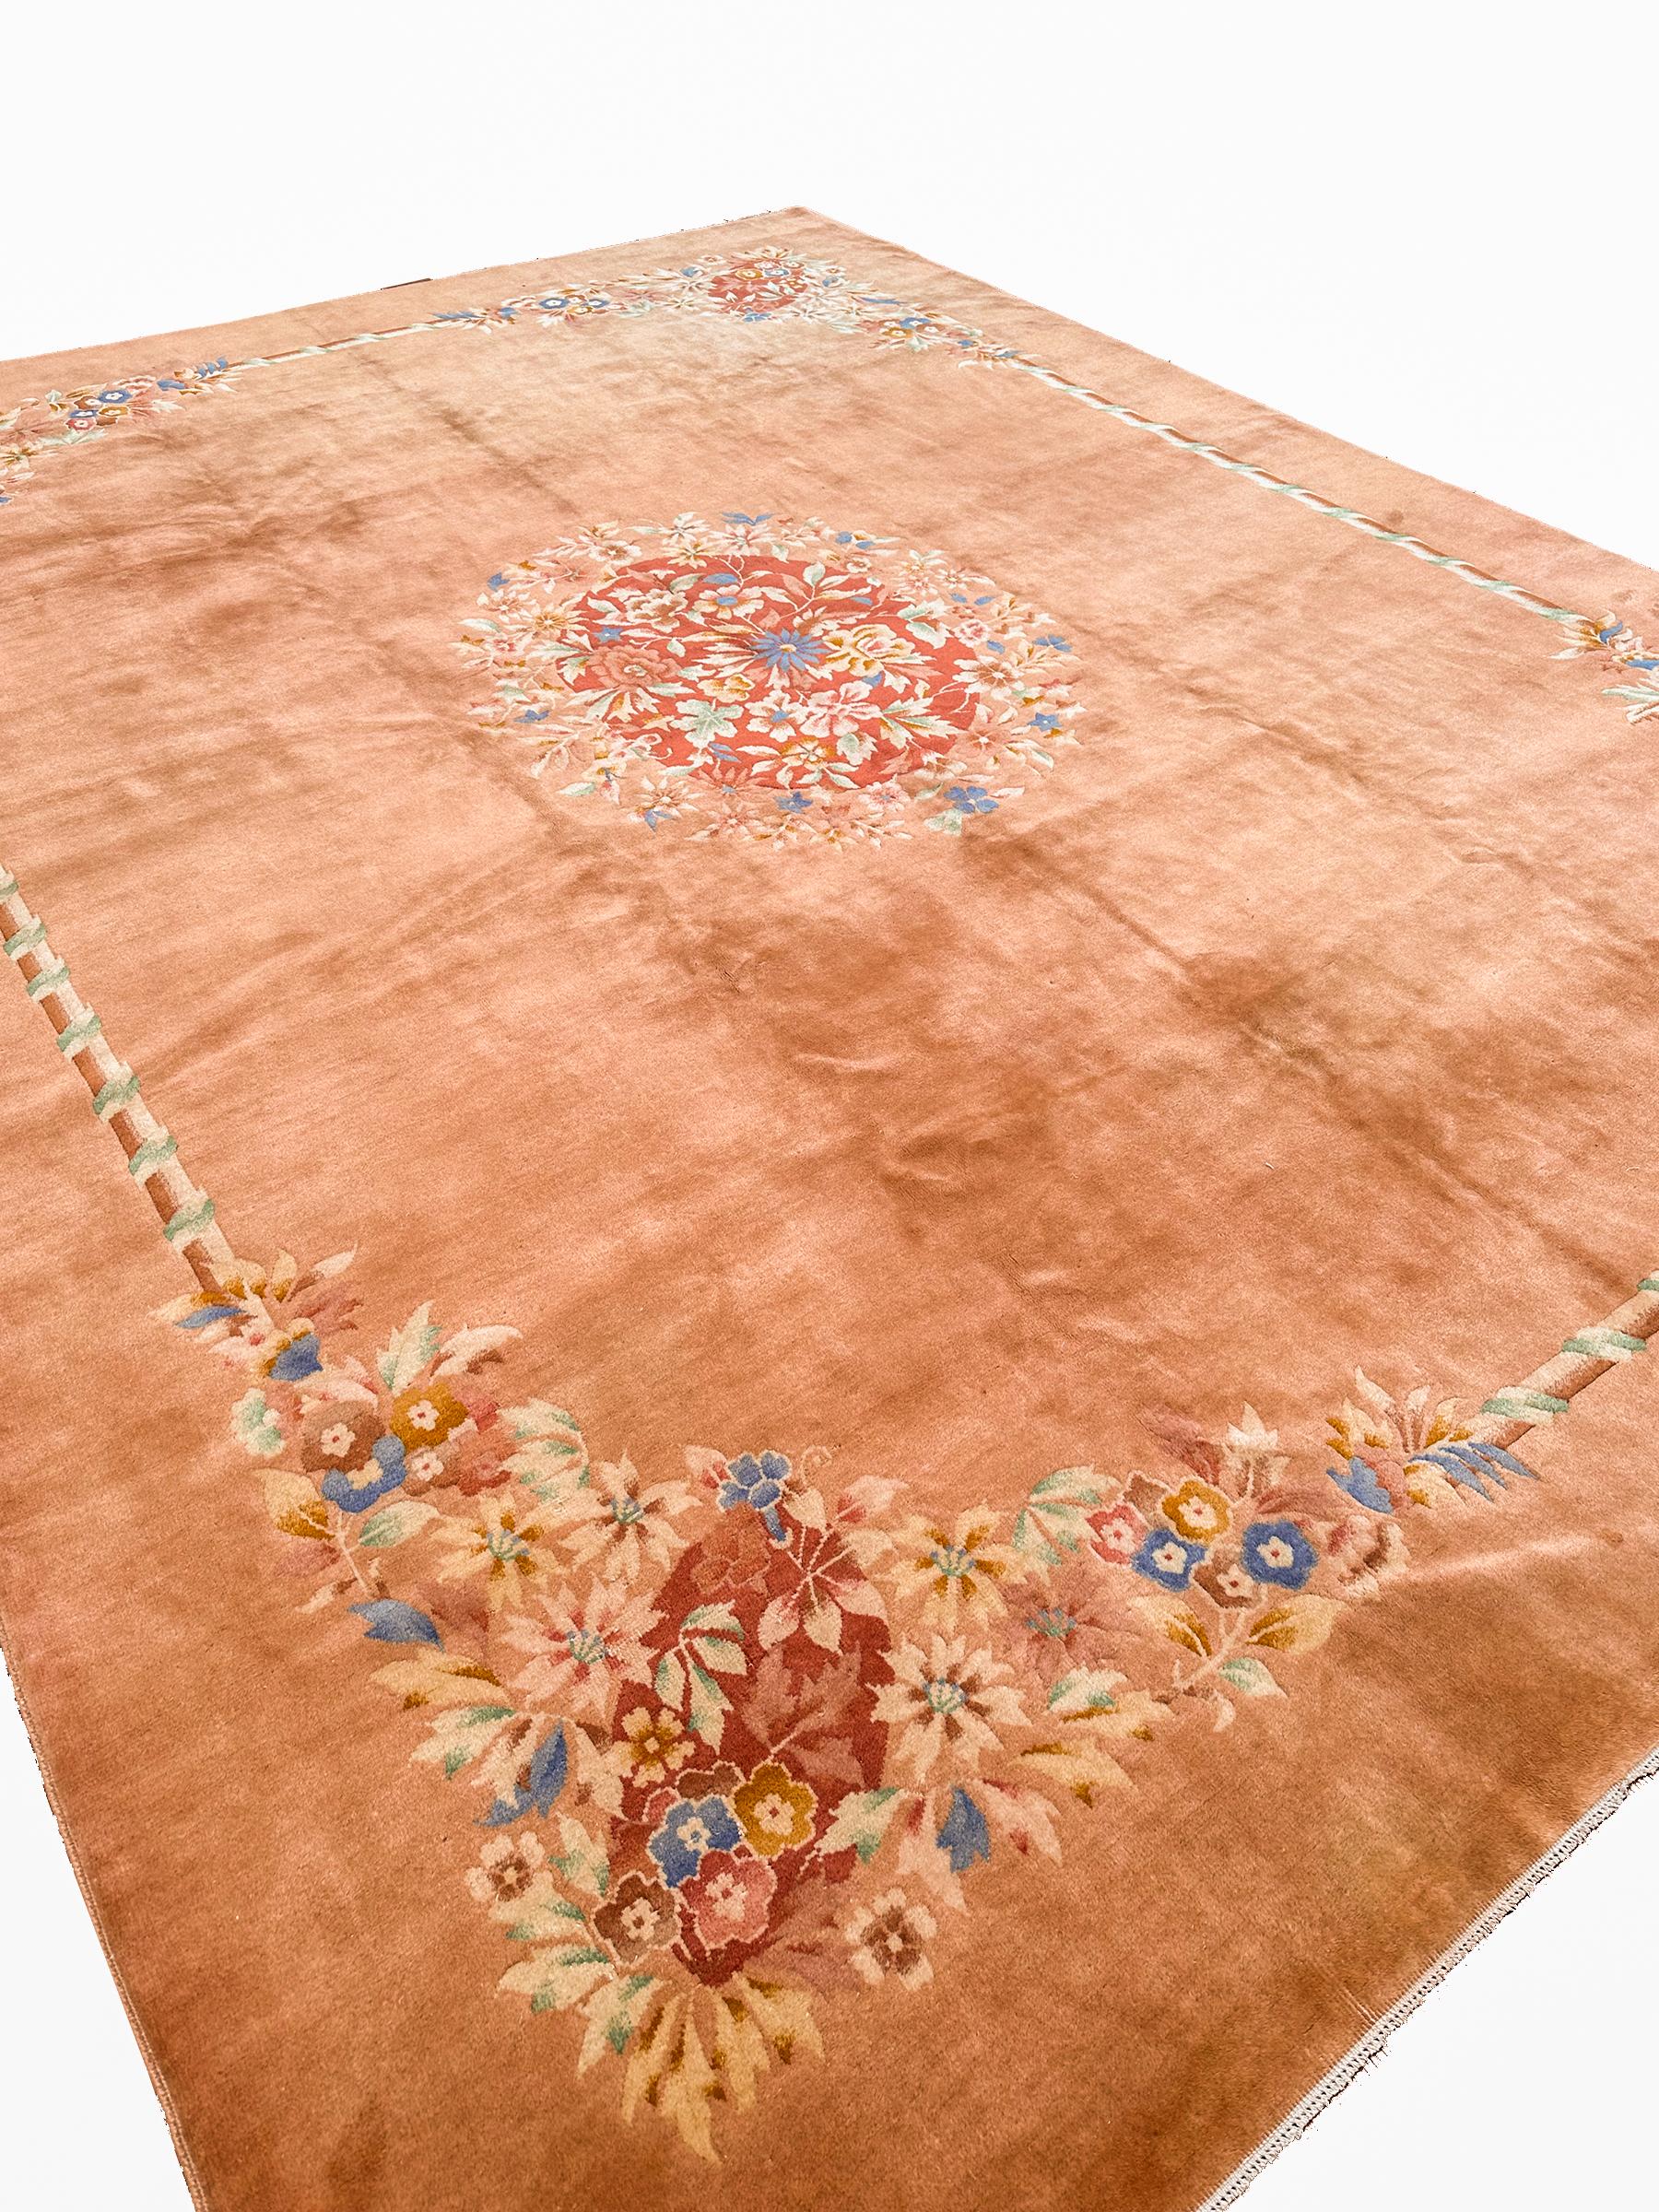 Early 20th Century Antique Art Deco Rug Handmade Chinese Rug 10x13 1920 298cm x 386cm For Sale